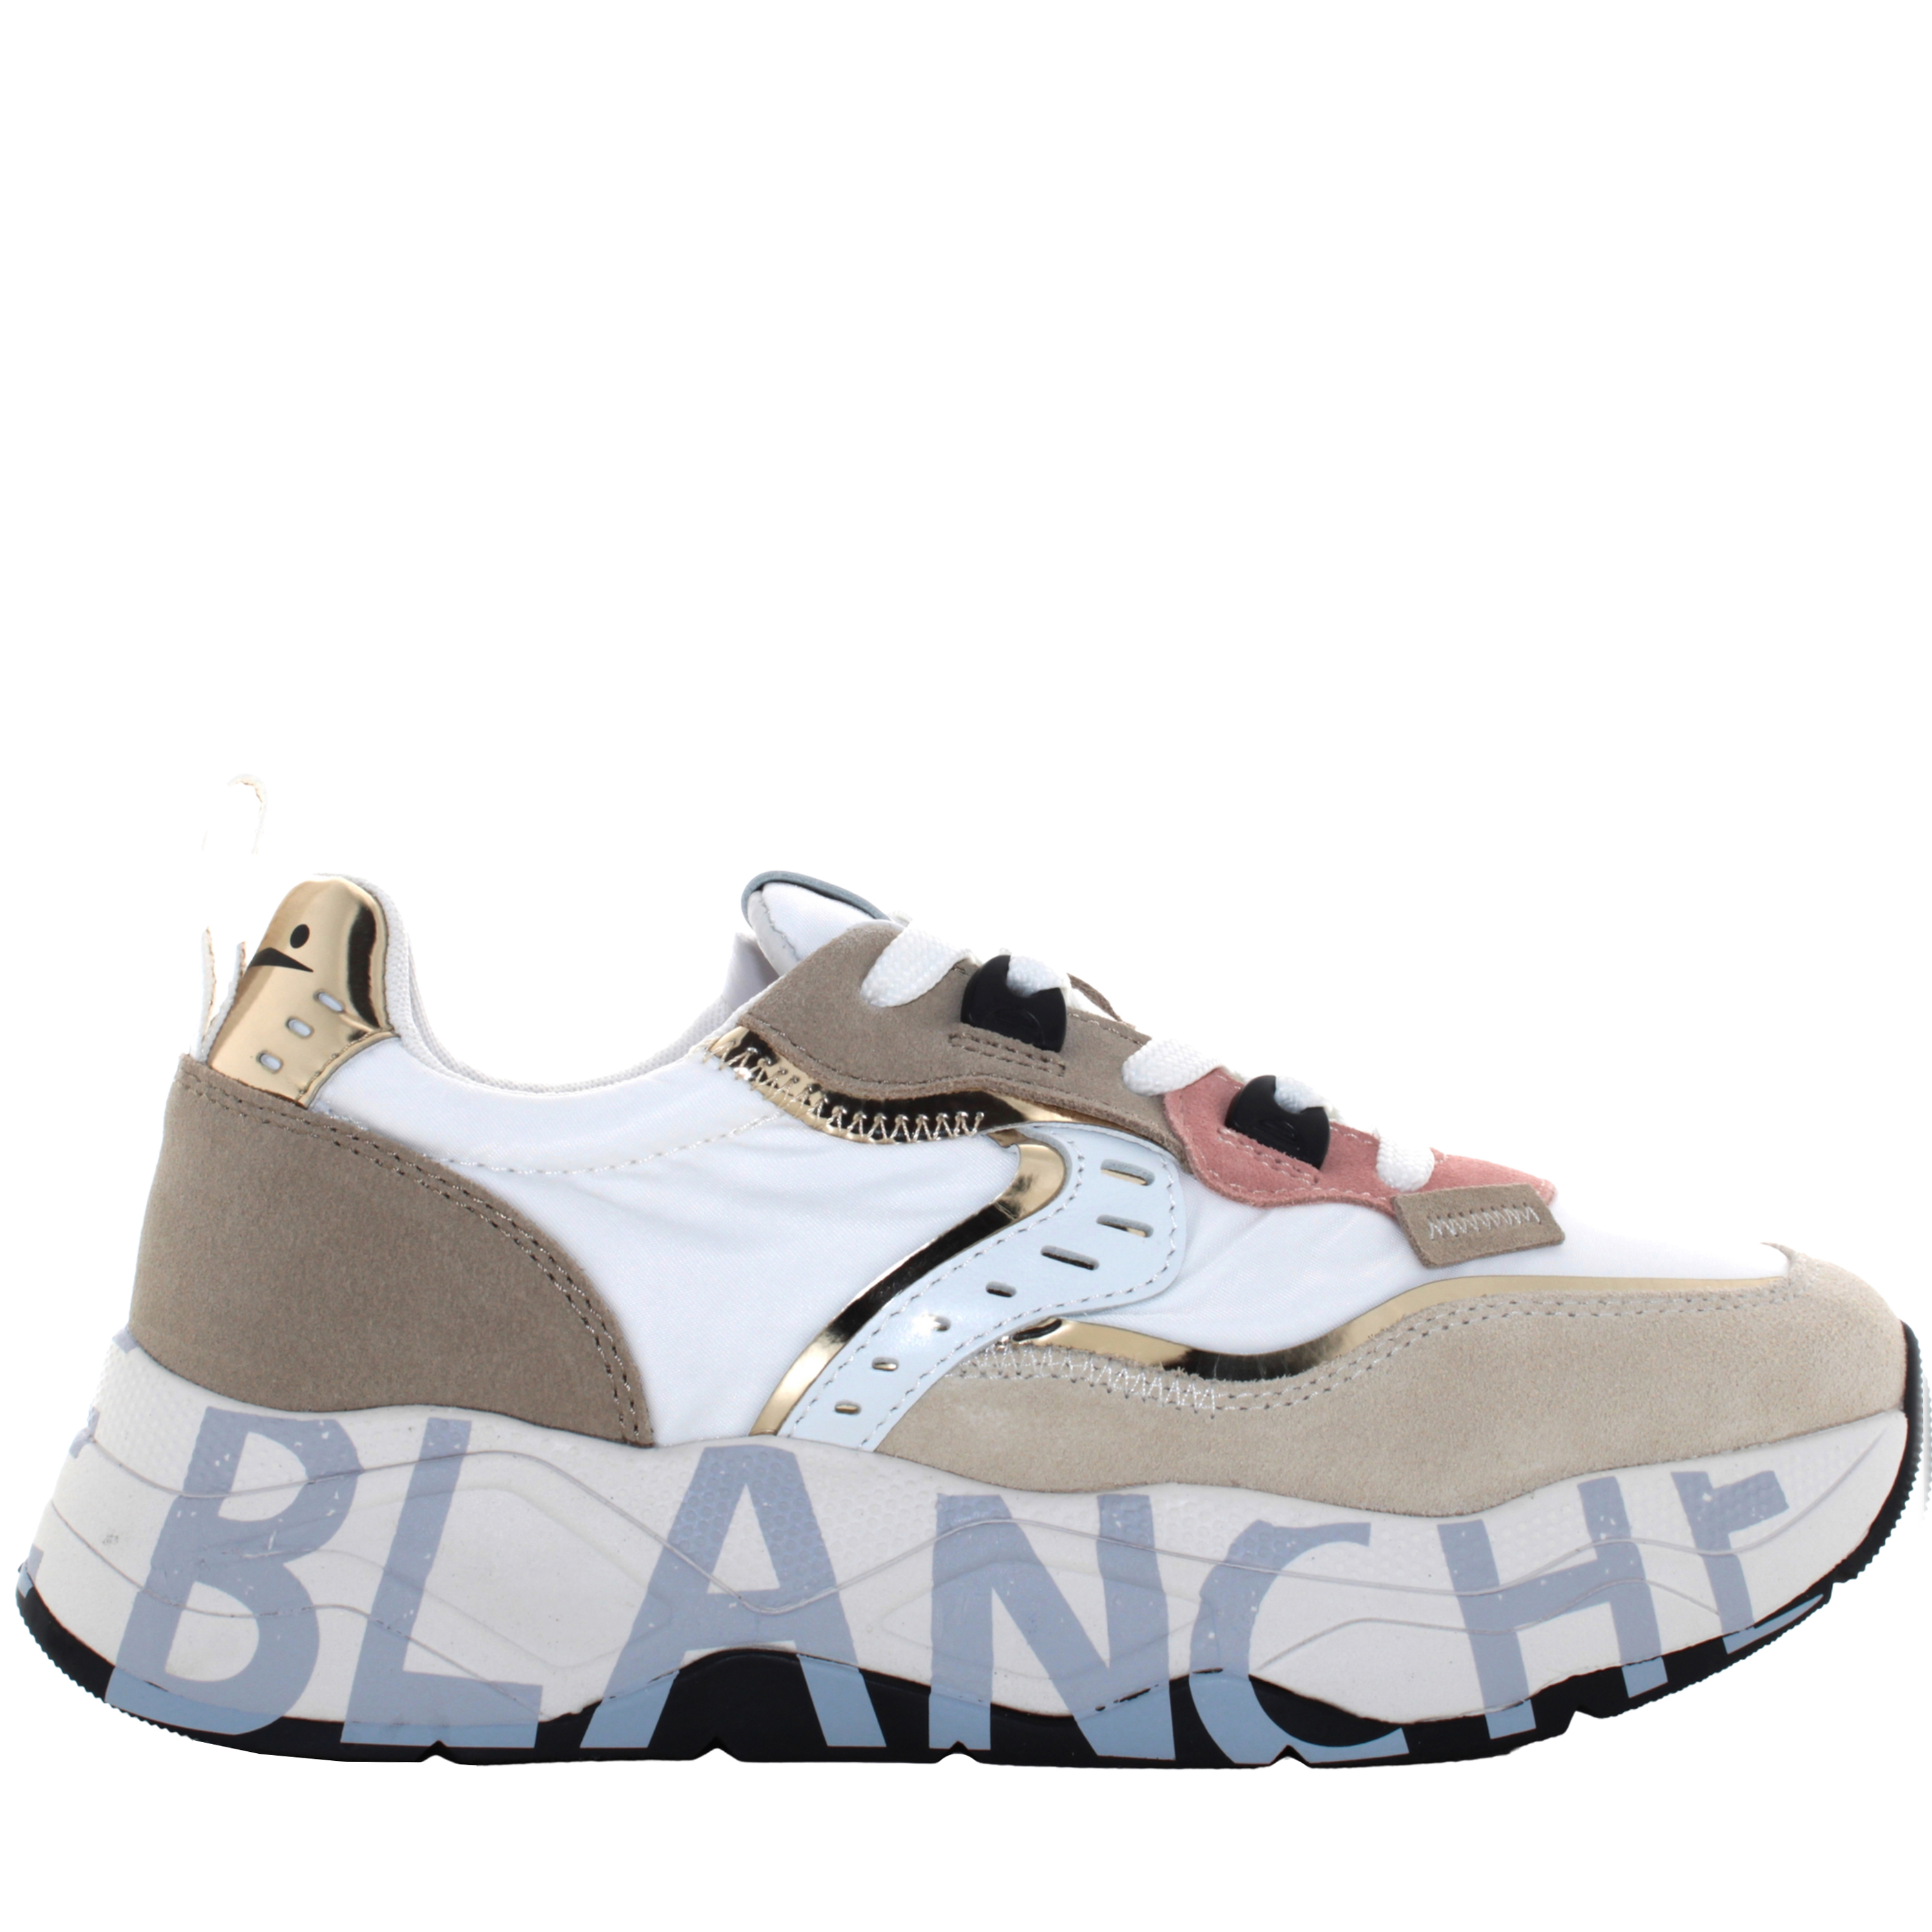 Voile Blanche donna sneakers basse 0012017475.08.1N61 CLUB105 P24